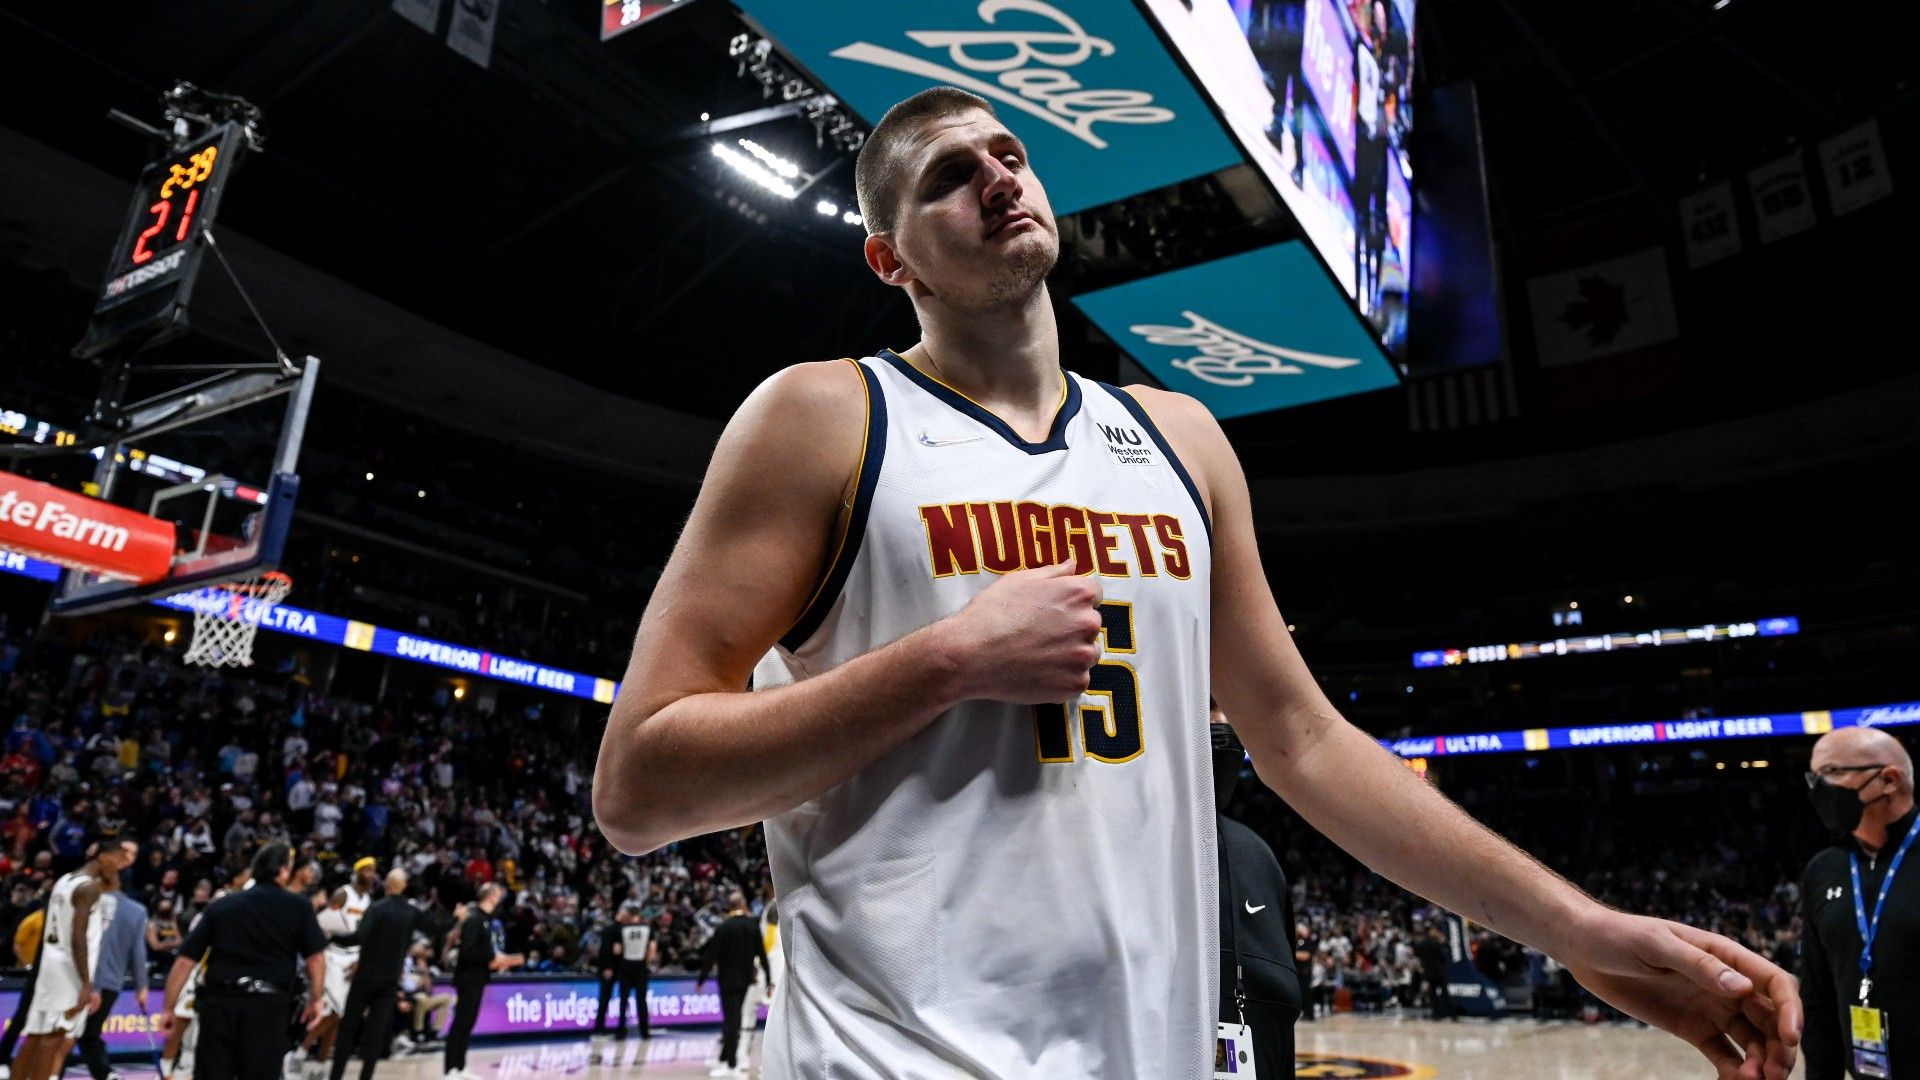 Nikola Jokic suspended for one game, Markieff Morris and Jimmy Butler fined